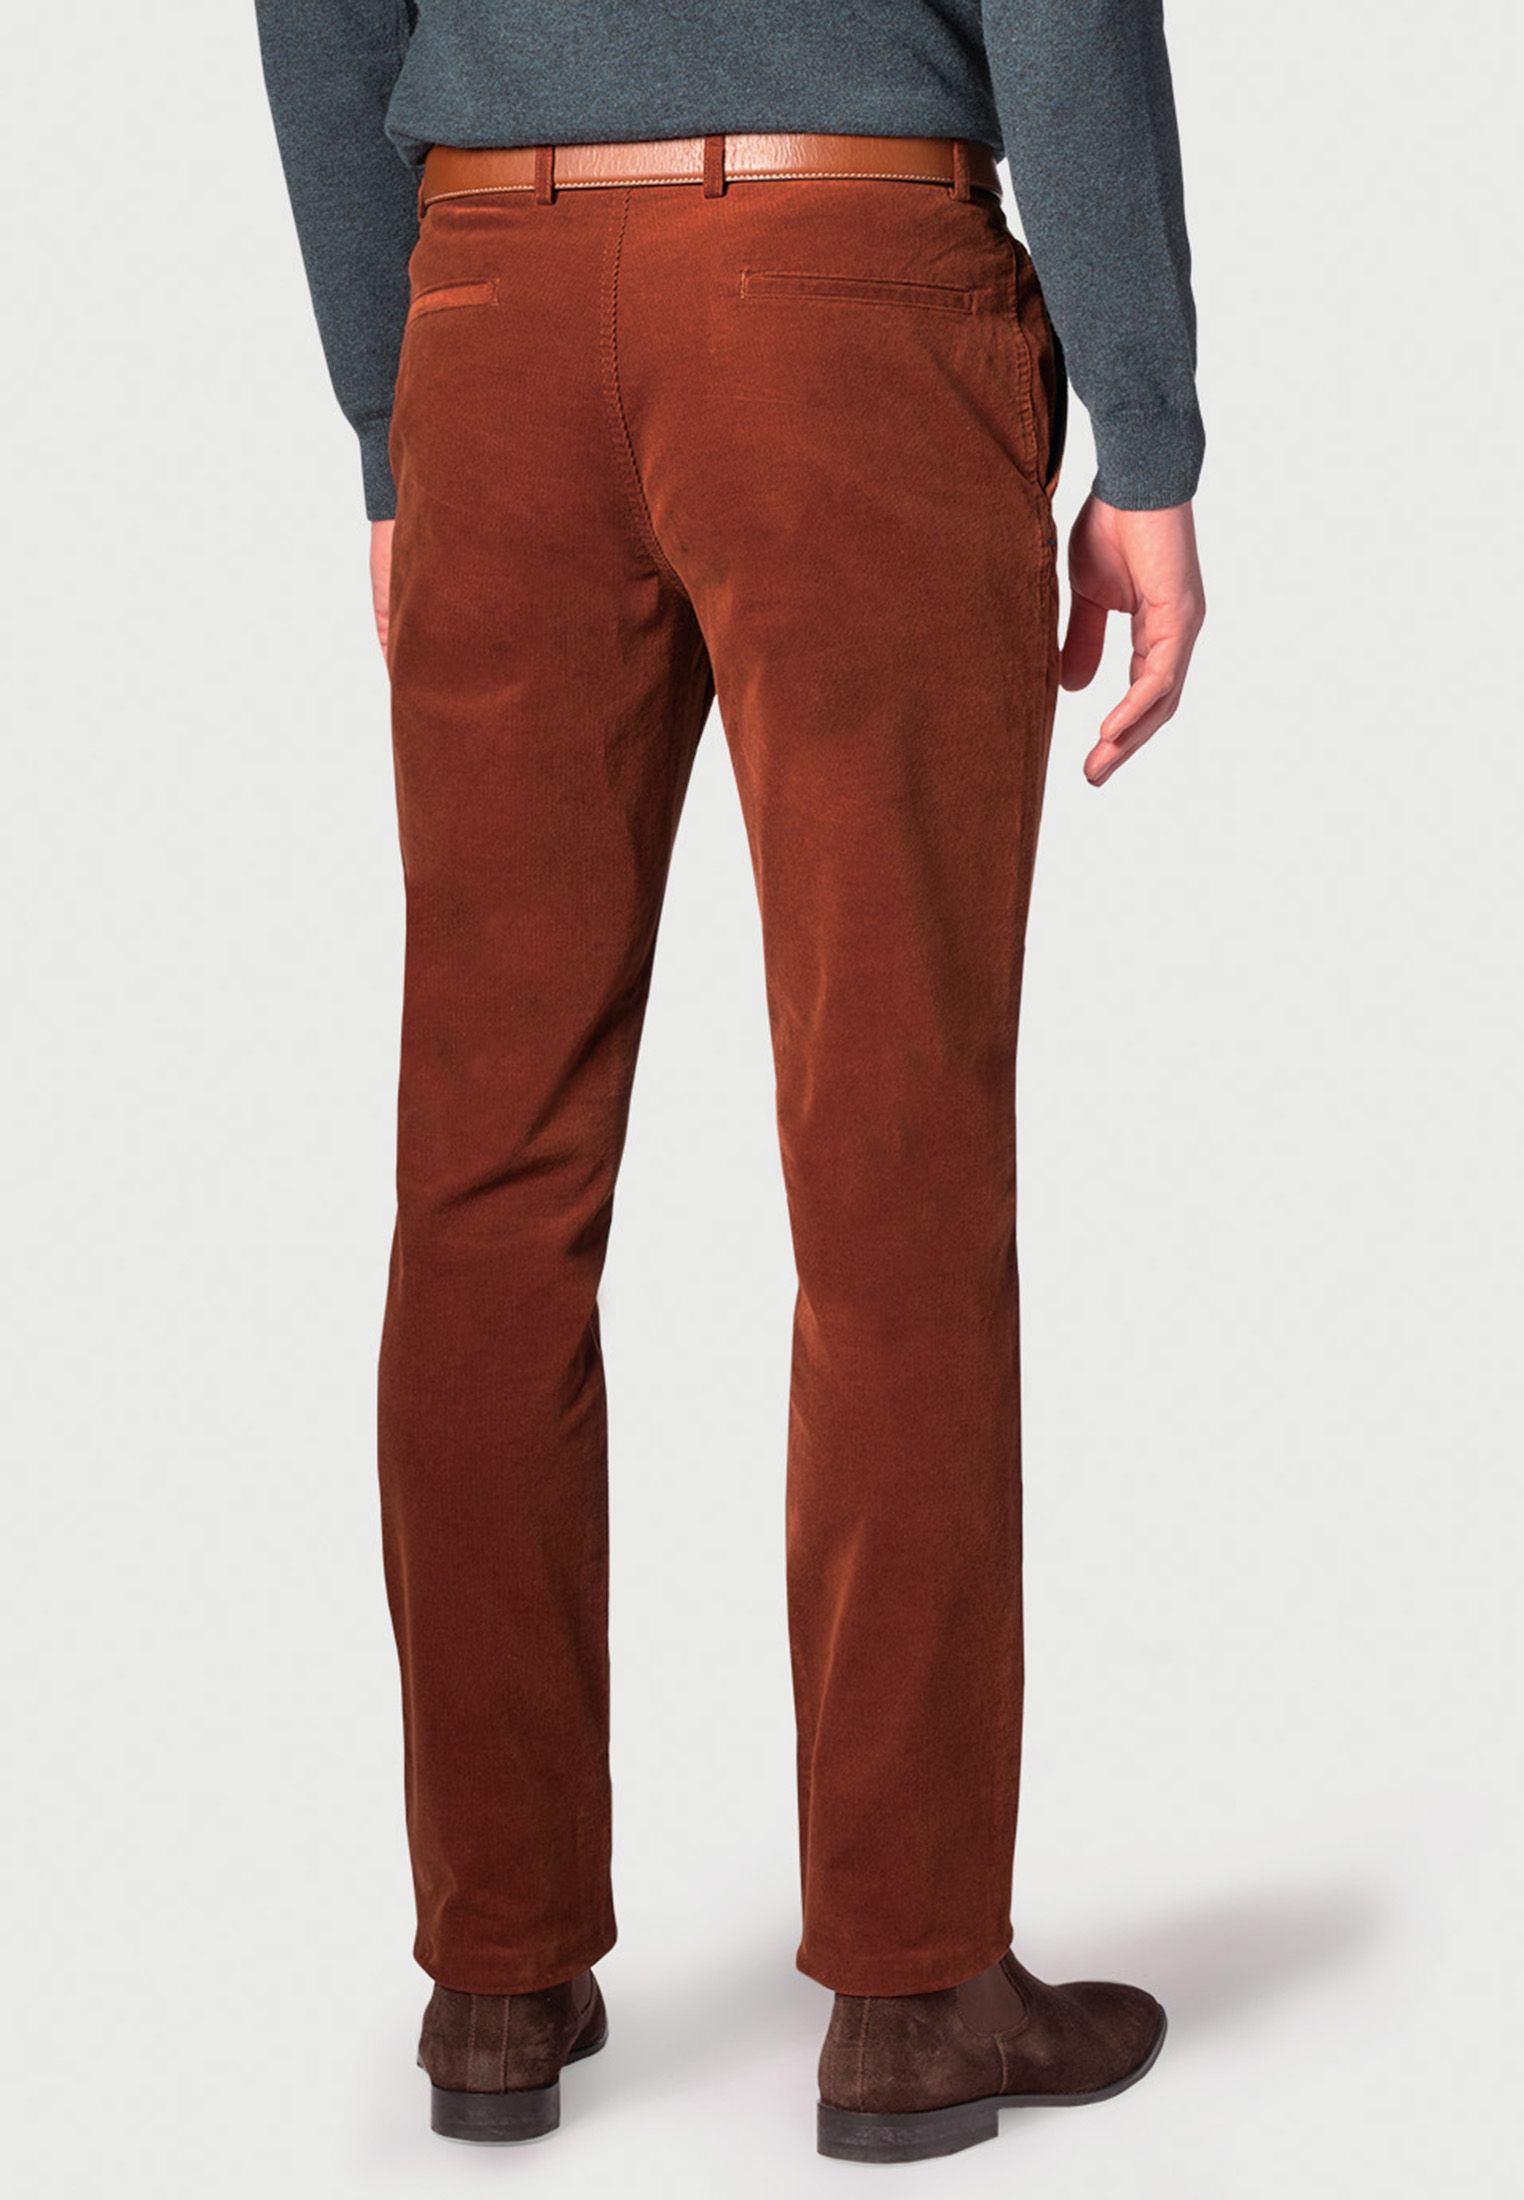 Shakespeare Russet Washed Cotton Needle Cord Pants